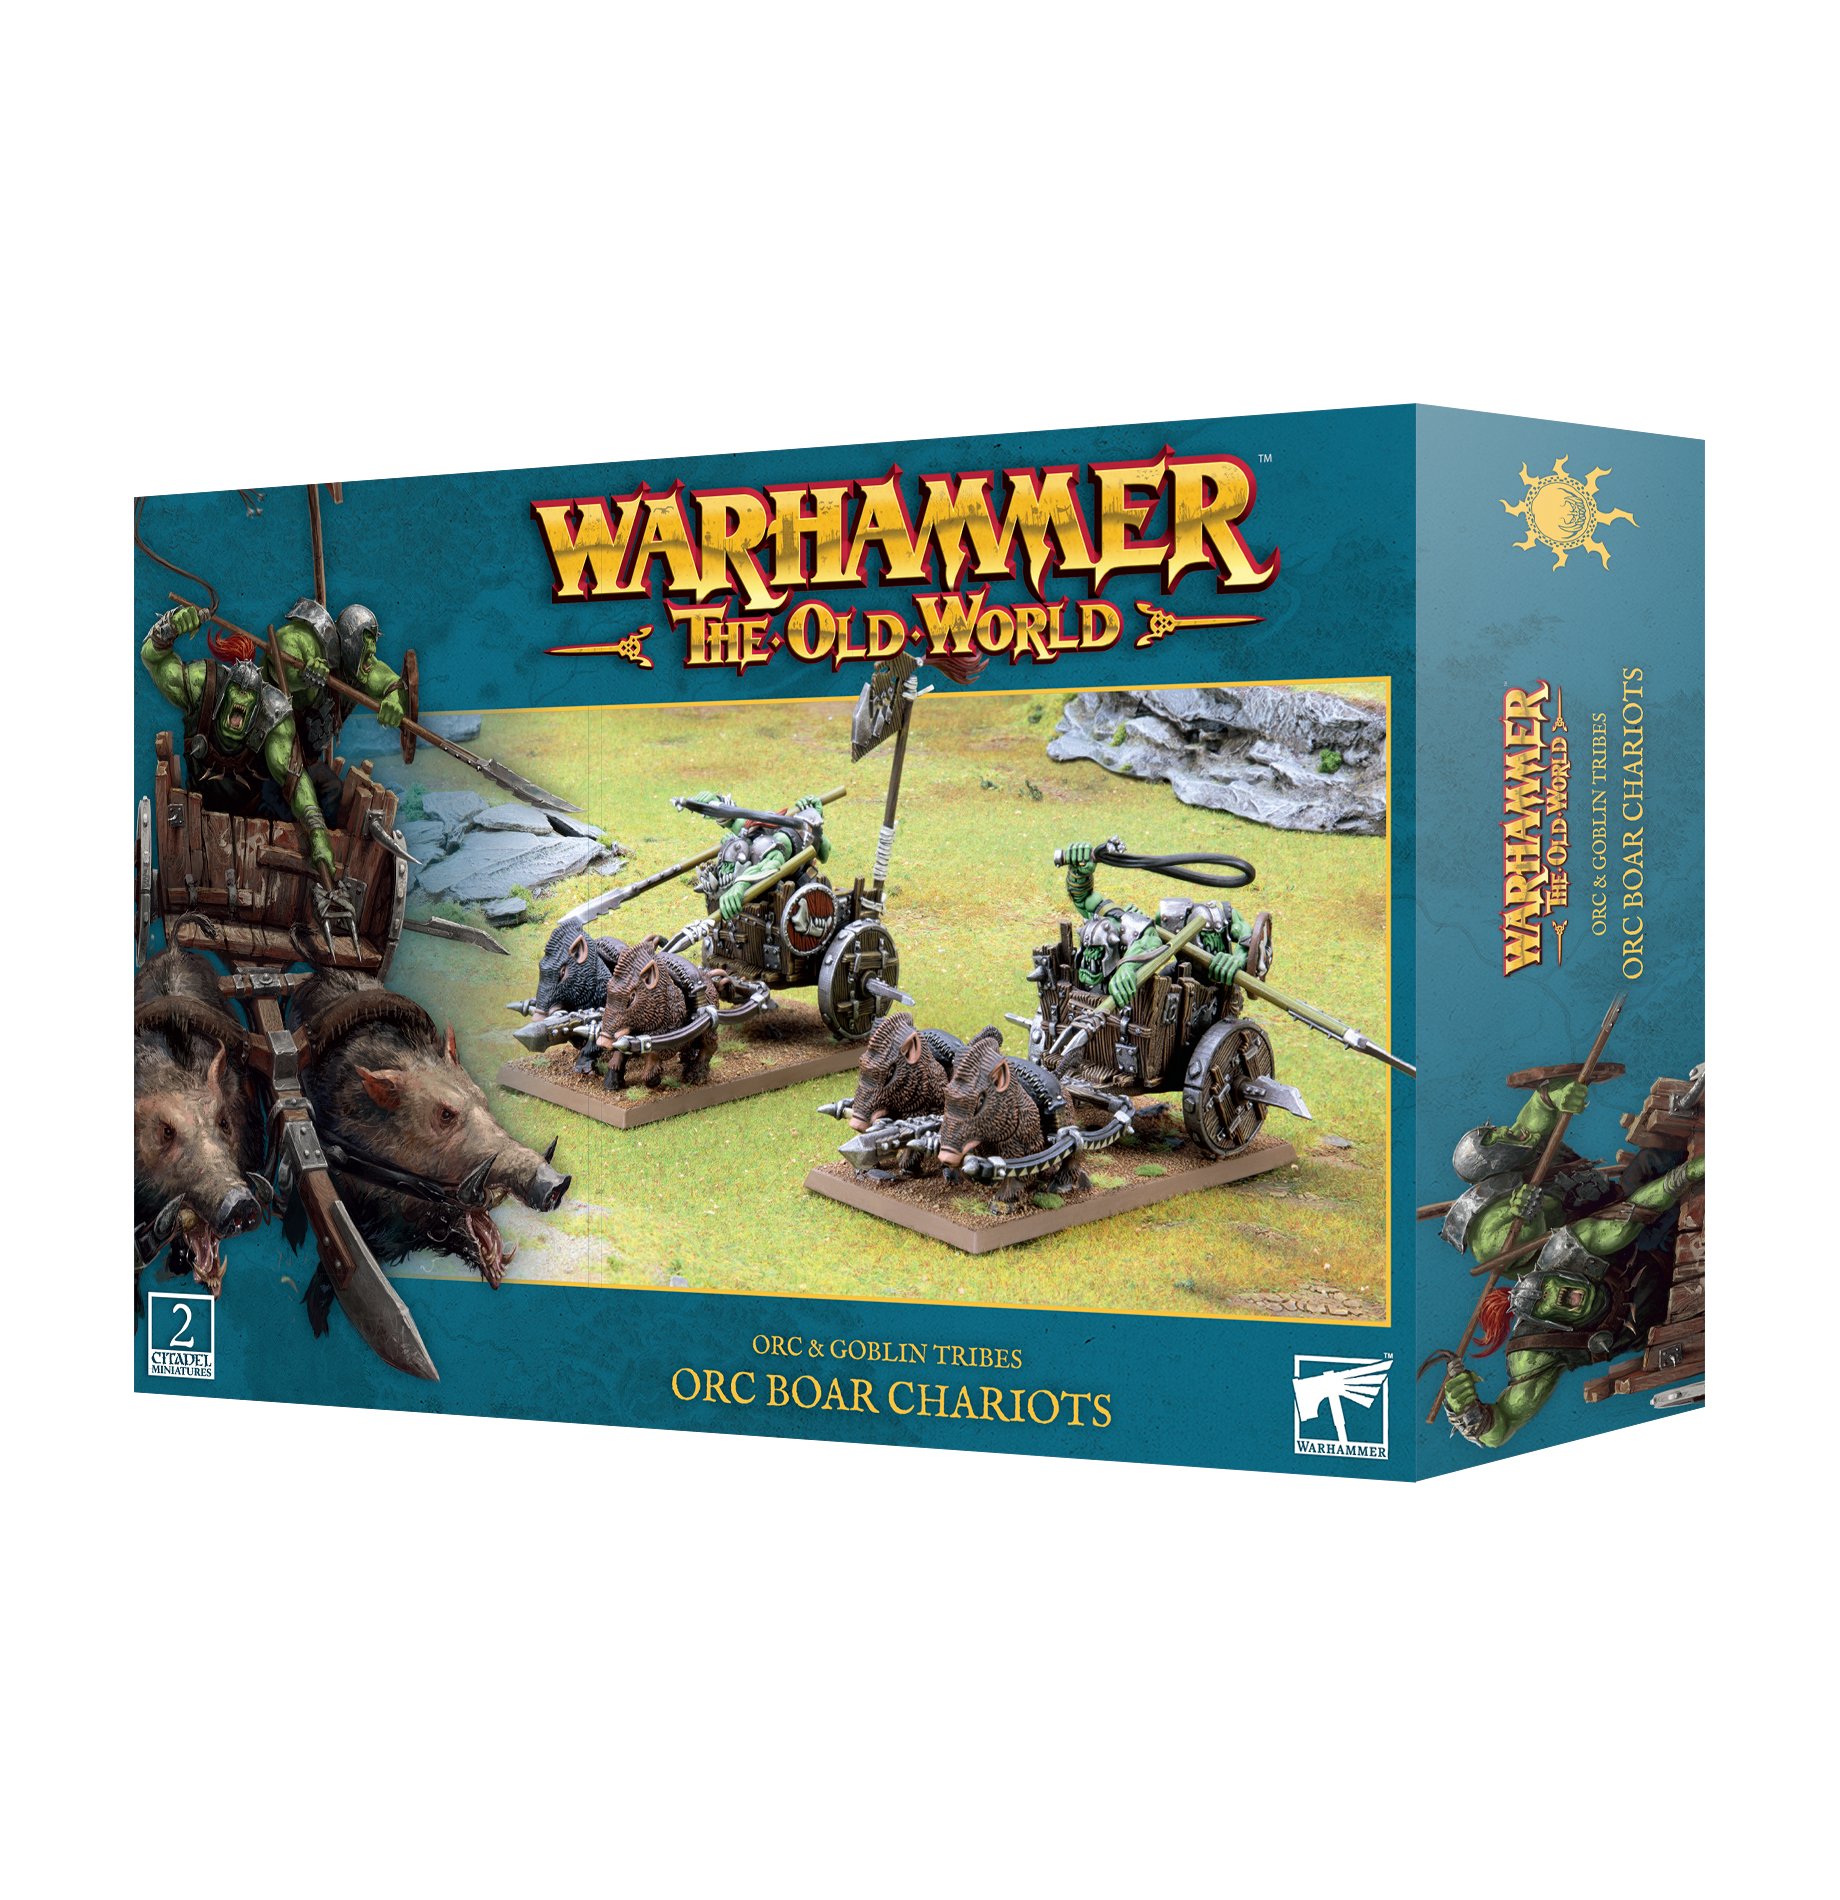 Warhammer: The Old World: Orc & Goblin Tribes: Orc Boar Chariots (May 4th) 